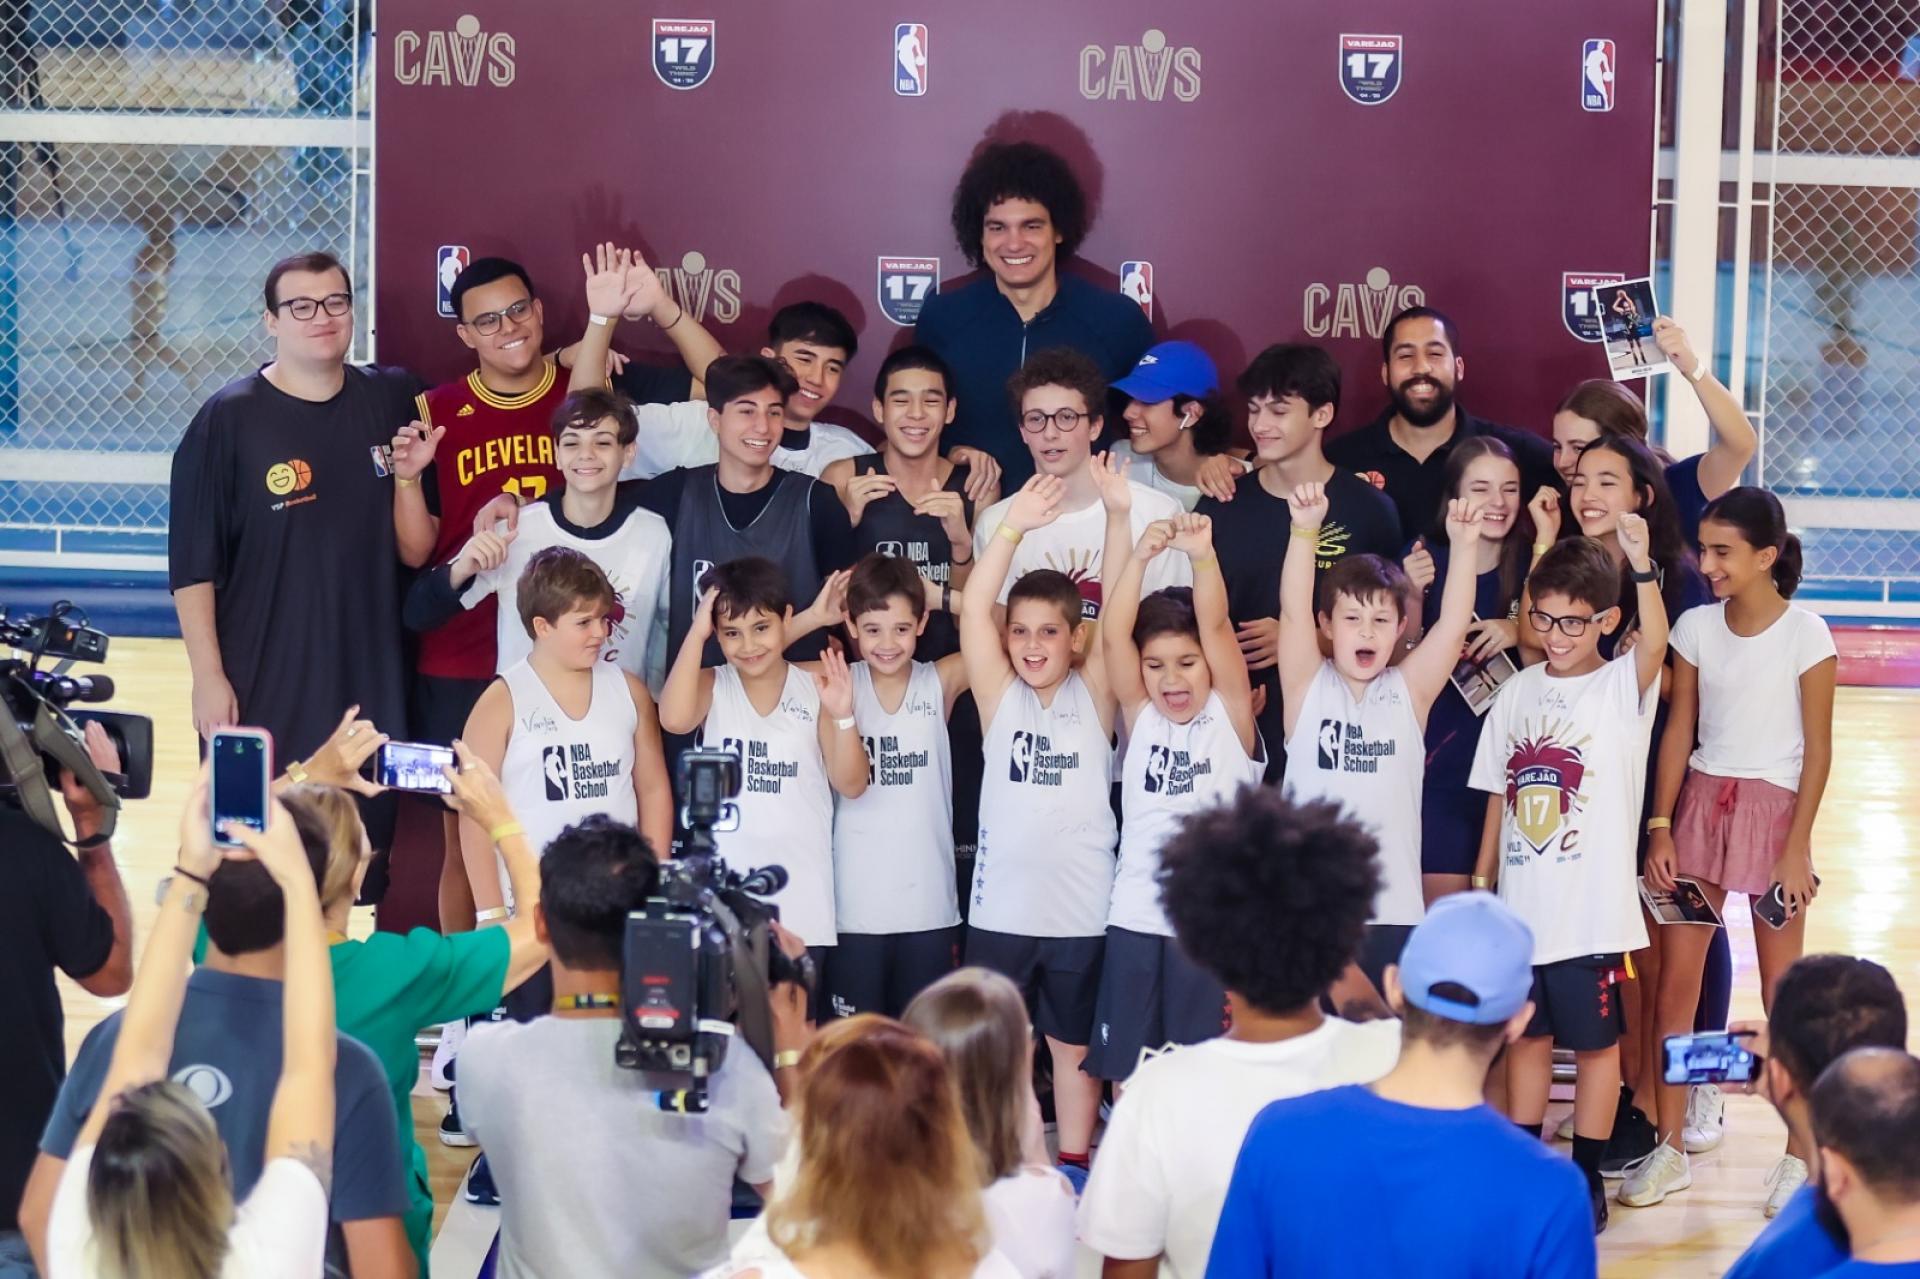 Cavs in Brazil - A Legacy Project